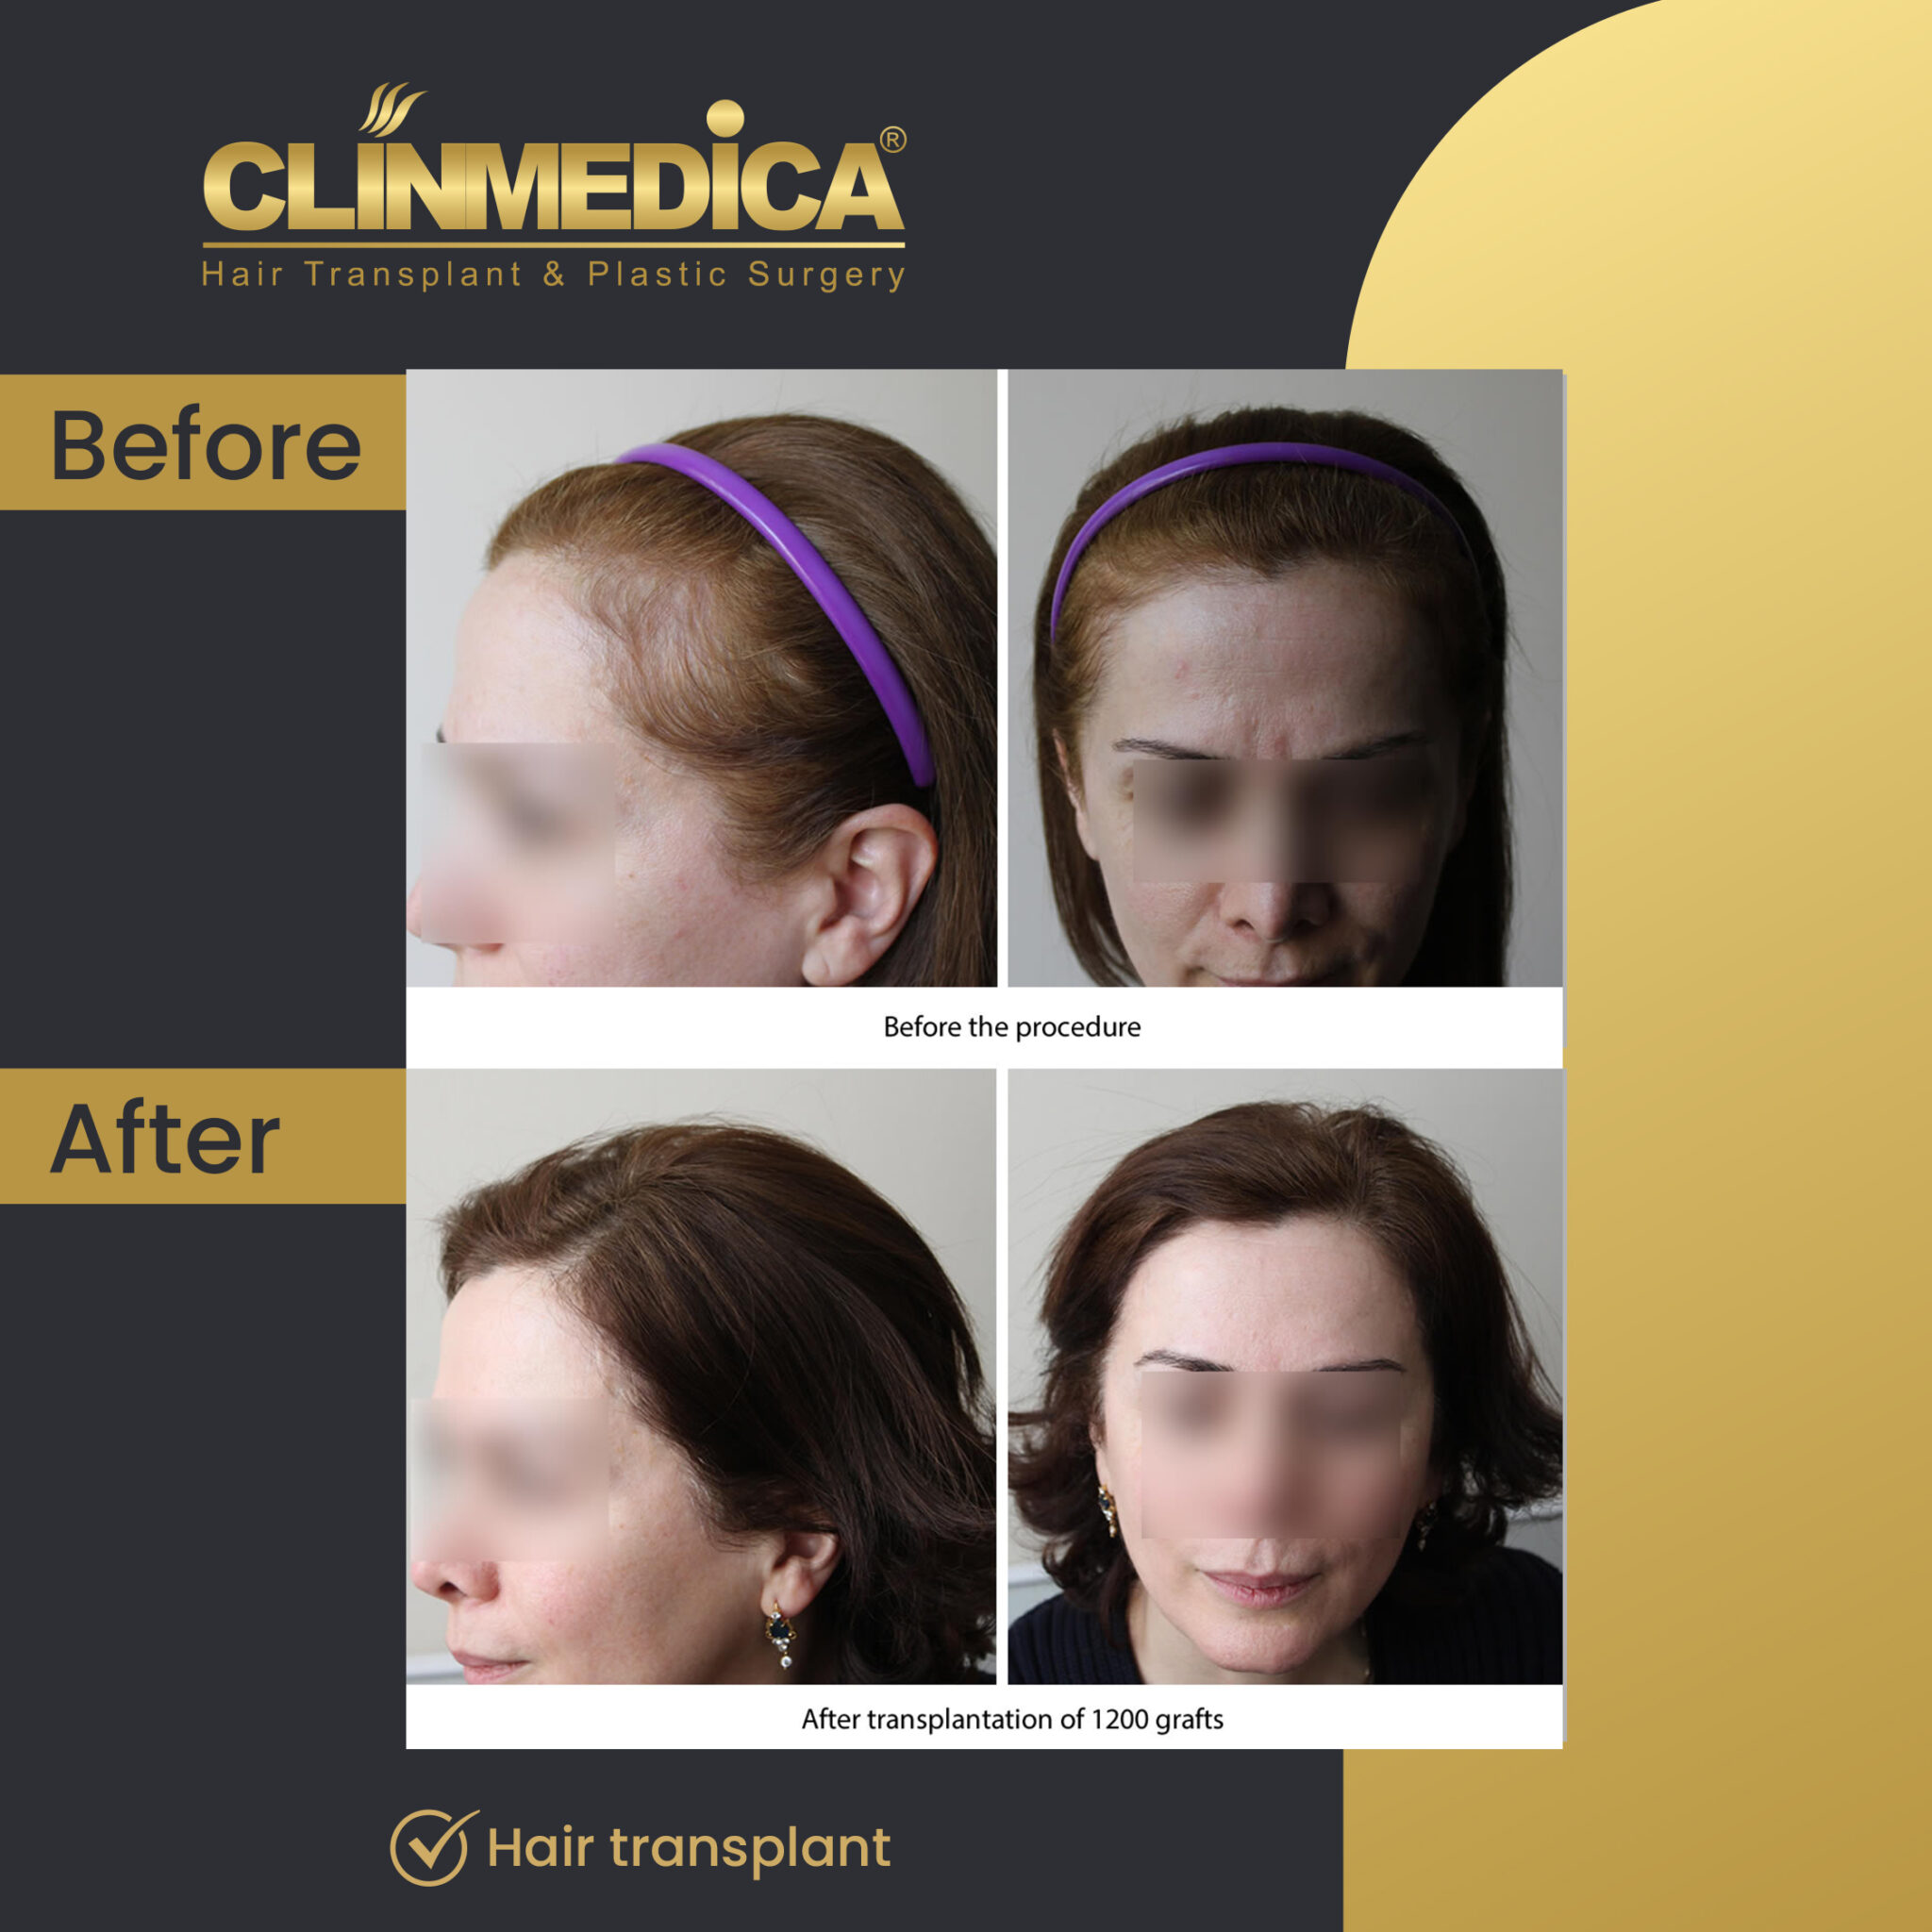 Hair-Transplant-for-women-Before-&-After-clinmedica-06